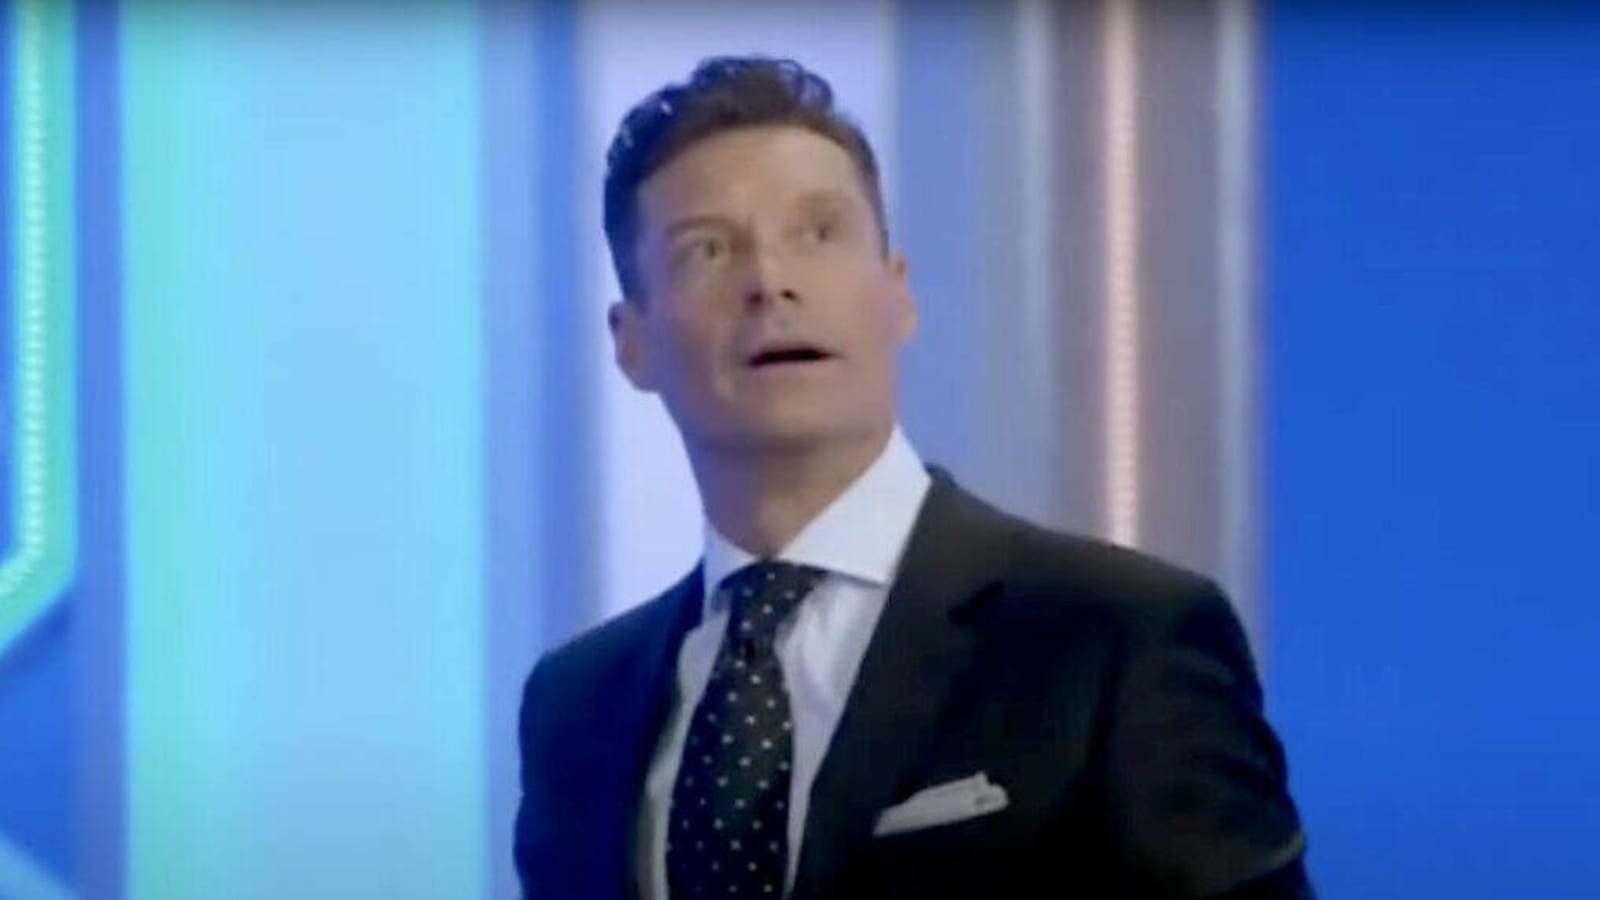 ‘Wheel of Fortune’: Ryan Seacrest Is Awestruck on Set With Vanna White in New Promo (Video)